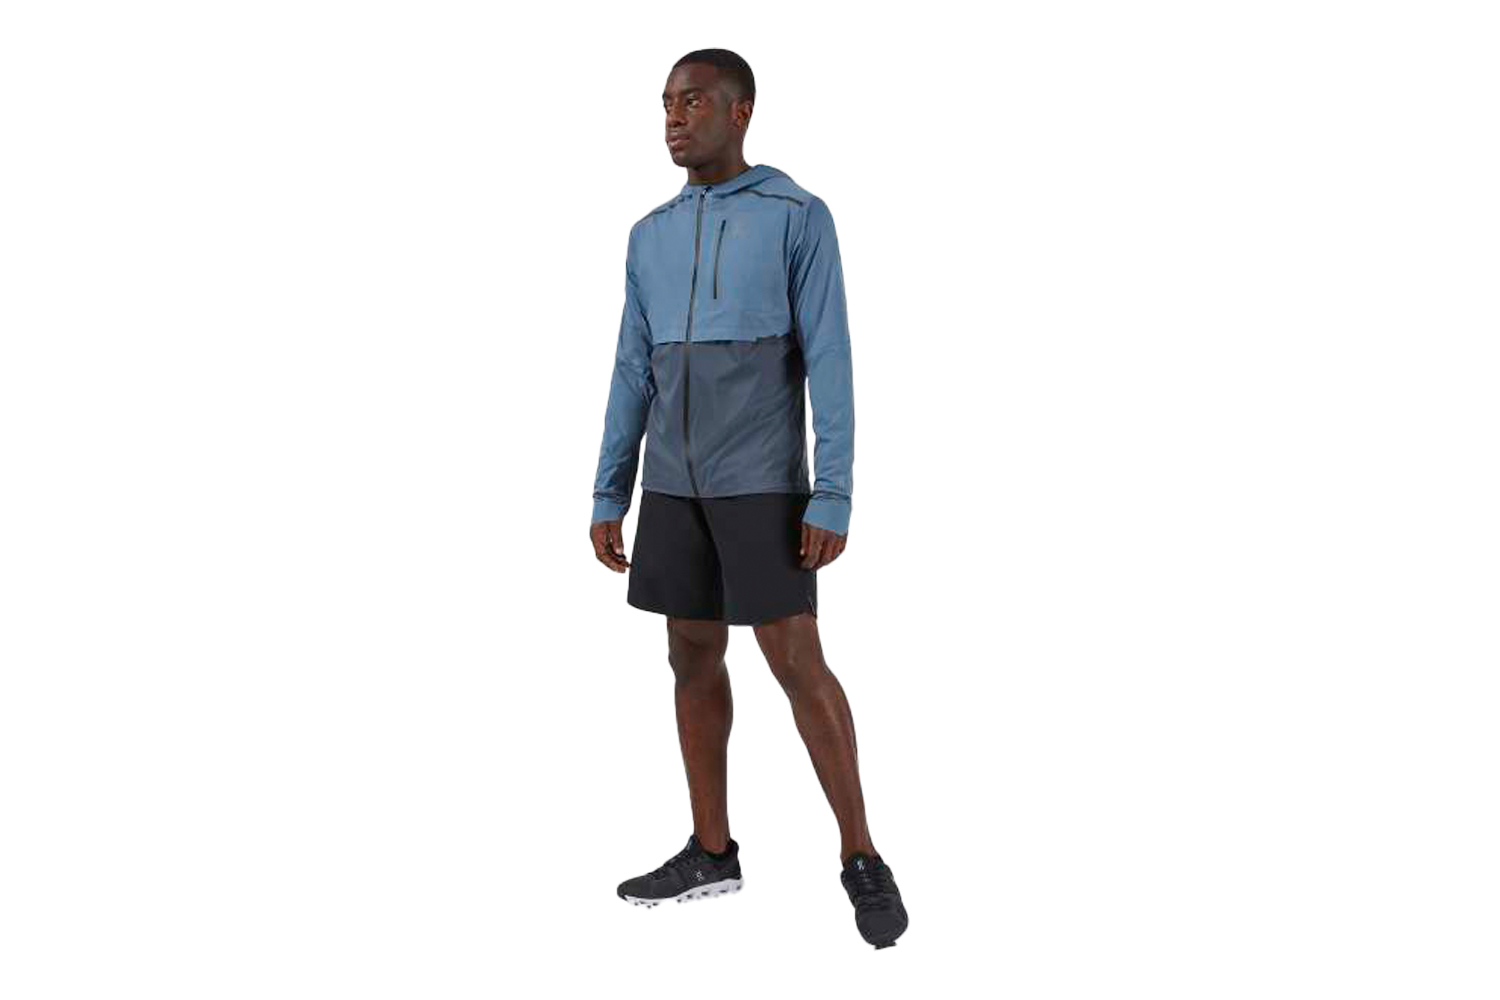 The On Weather Jacket is the best running jacket in 2022 when exercising outside in the rain